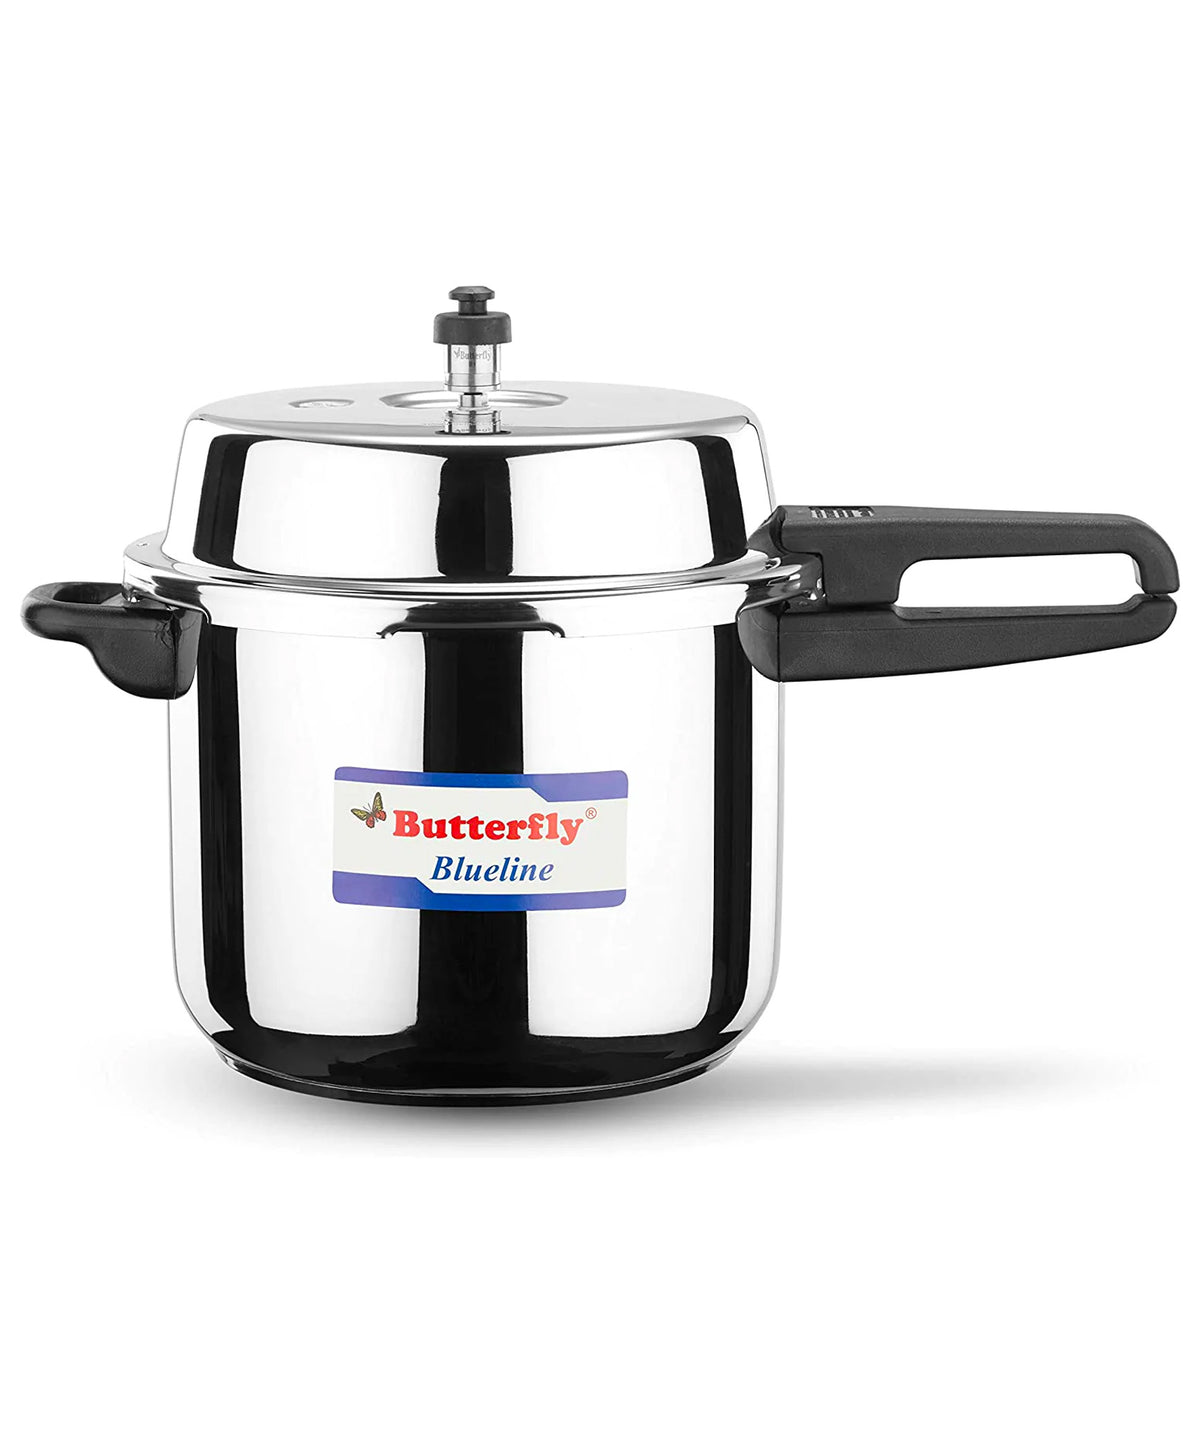 Butterfly, Stainless Steel 10 Litres Pressure Cooker, BFLY10000S